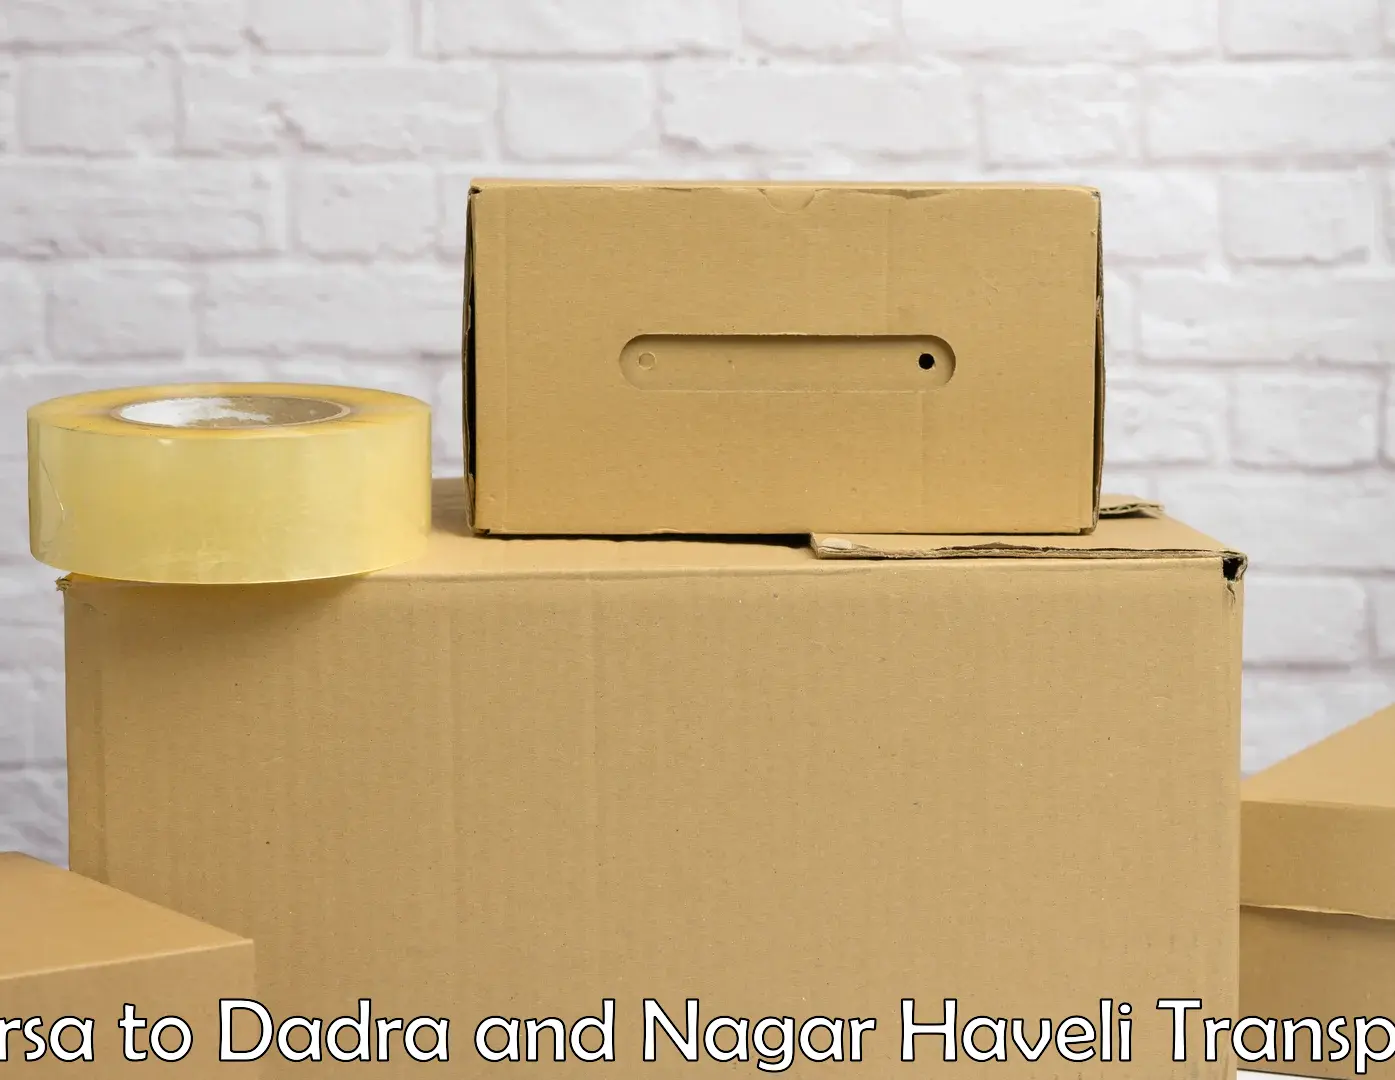 Air freight transport services in Parsa to Dadra and Nagar Haveli